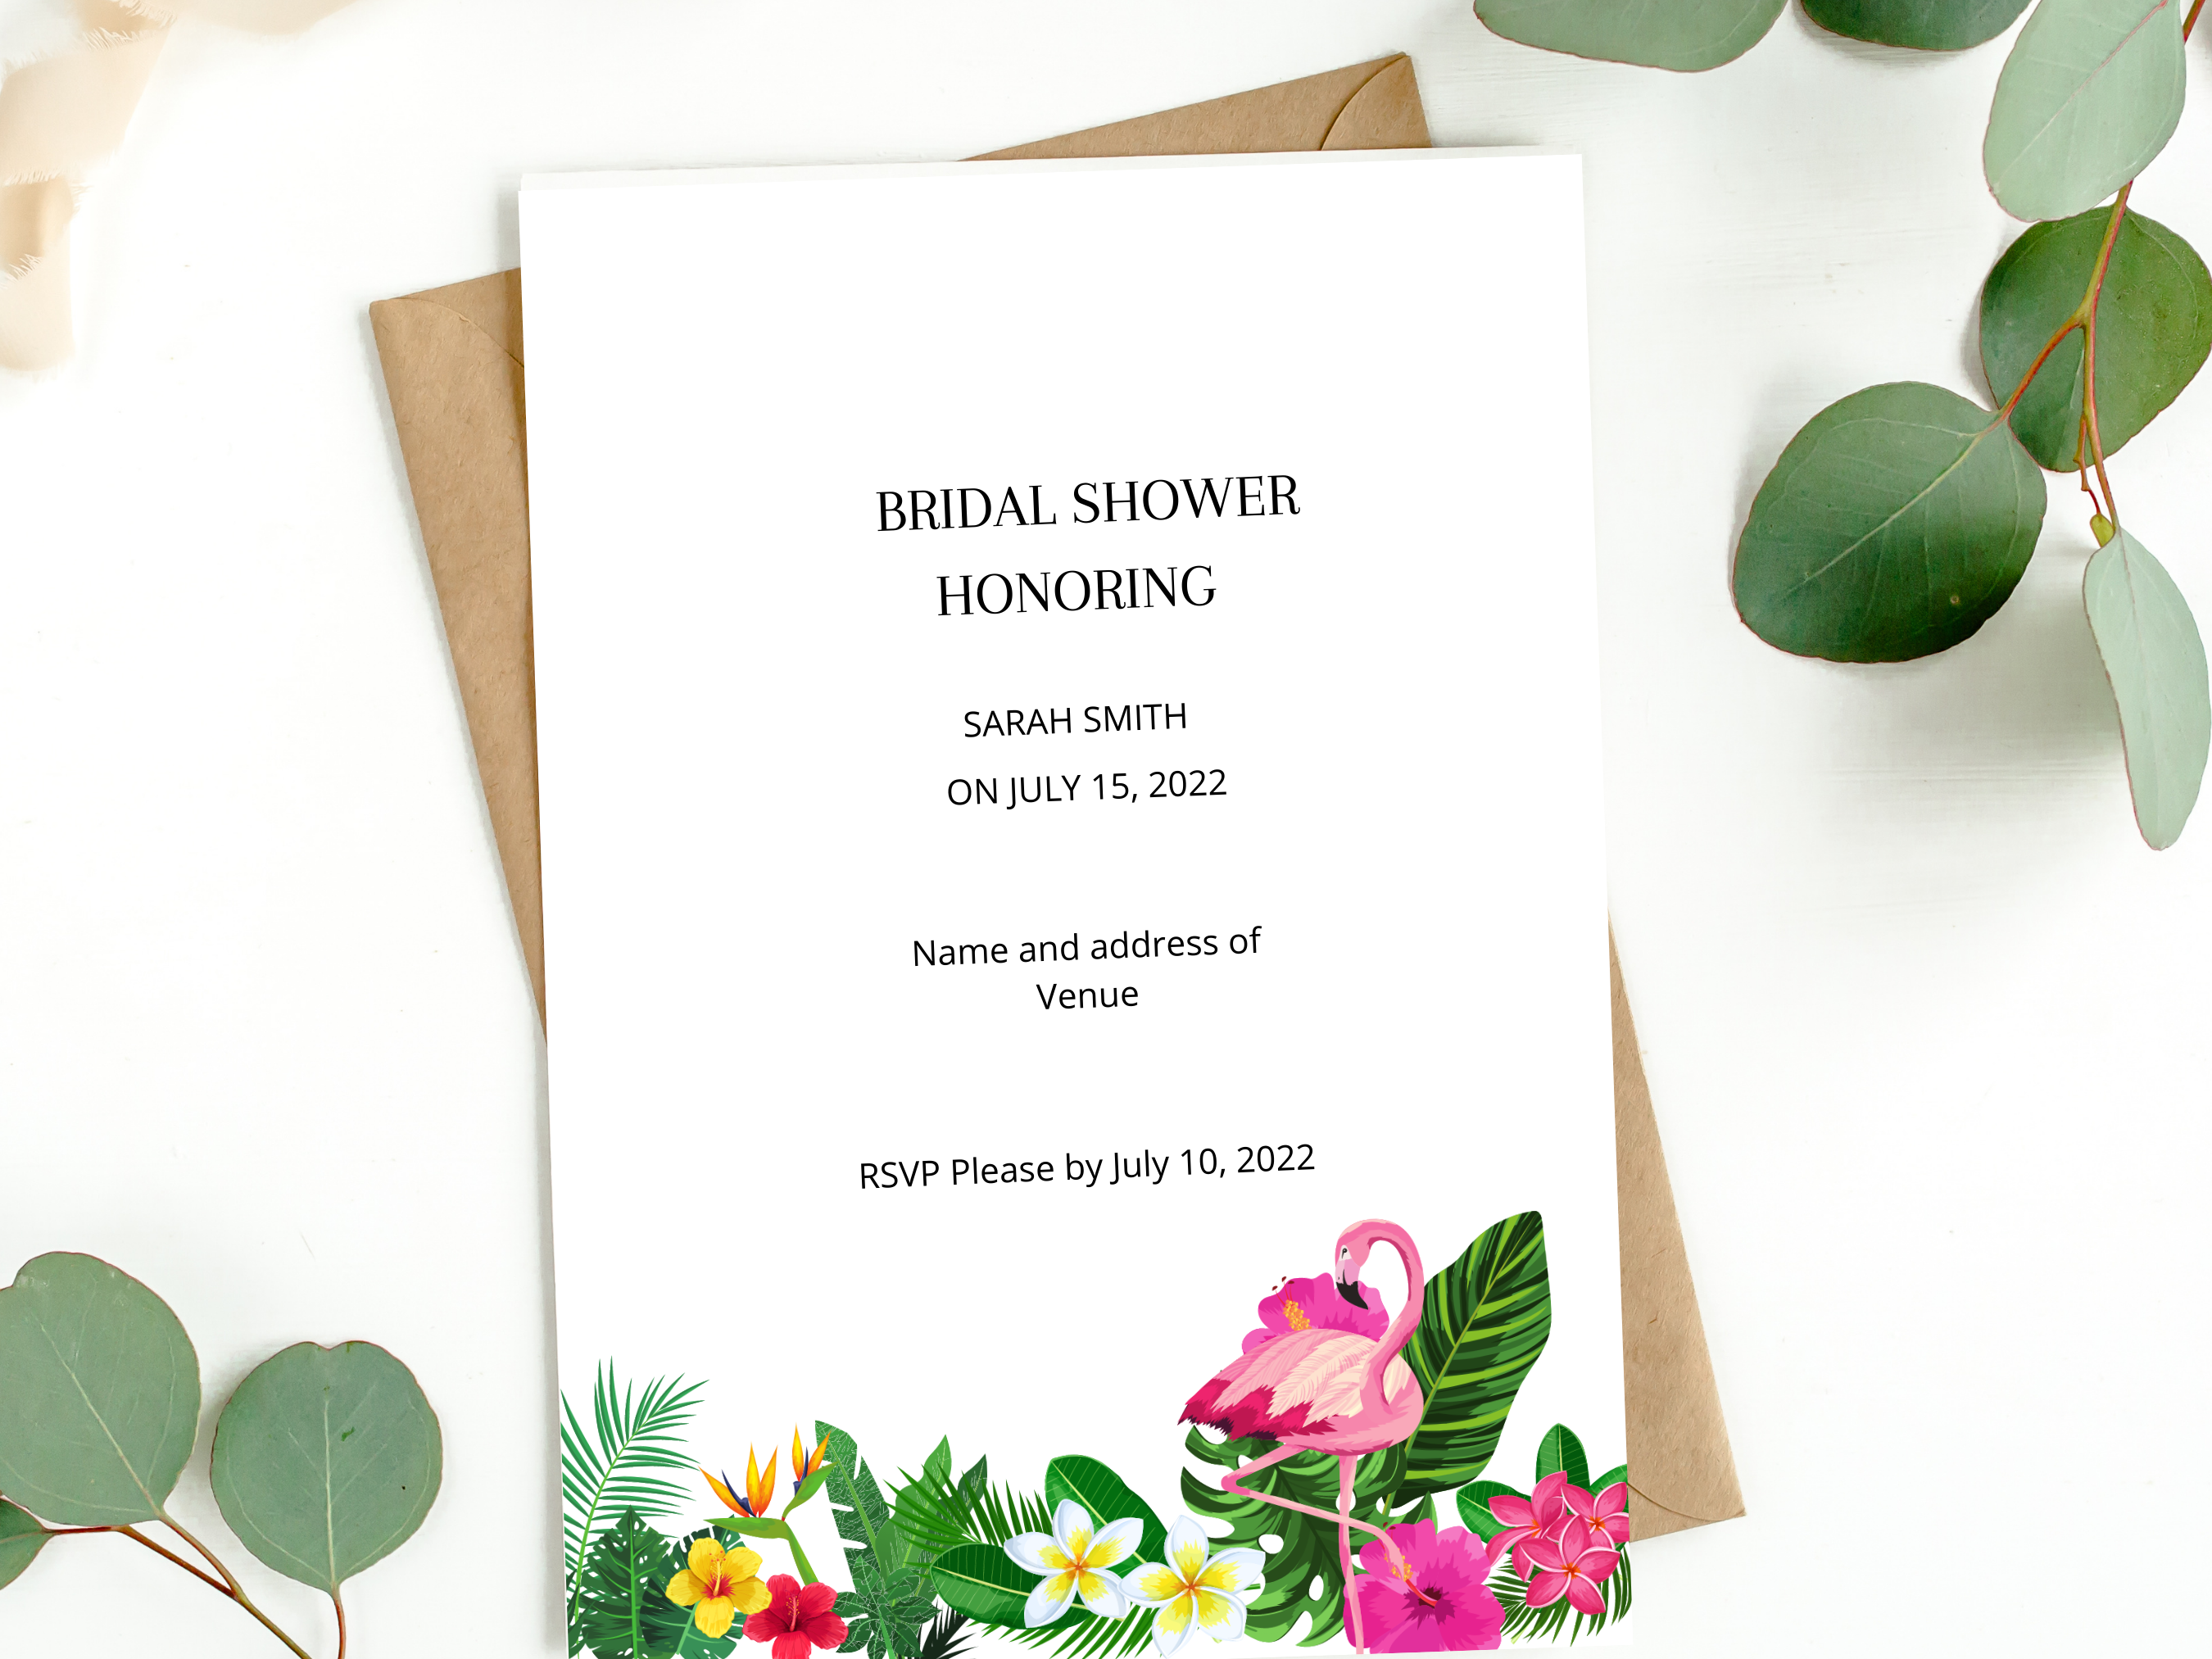 Cute and colorful printables